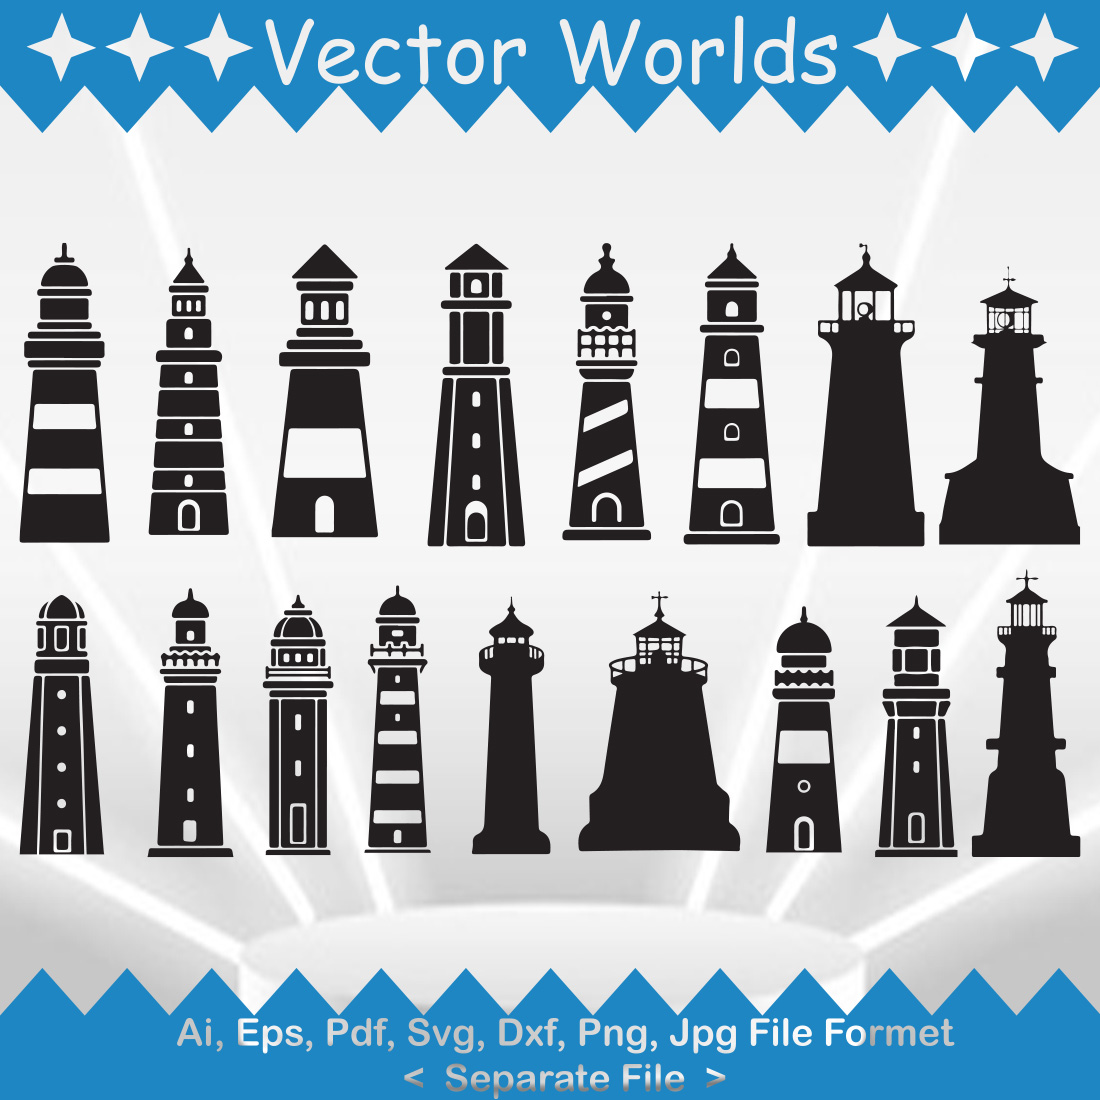 Lighthouse SVG Vector Design cover image.